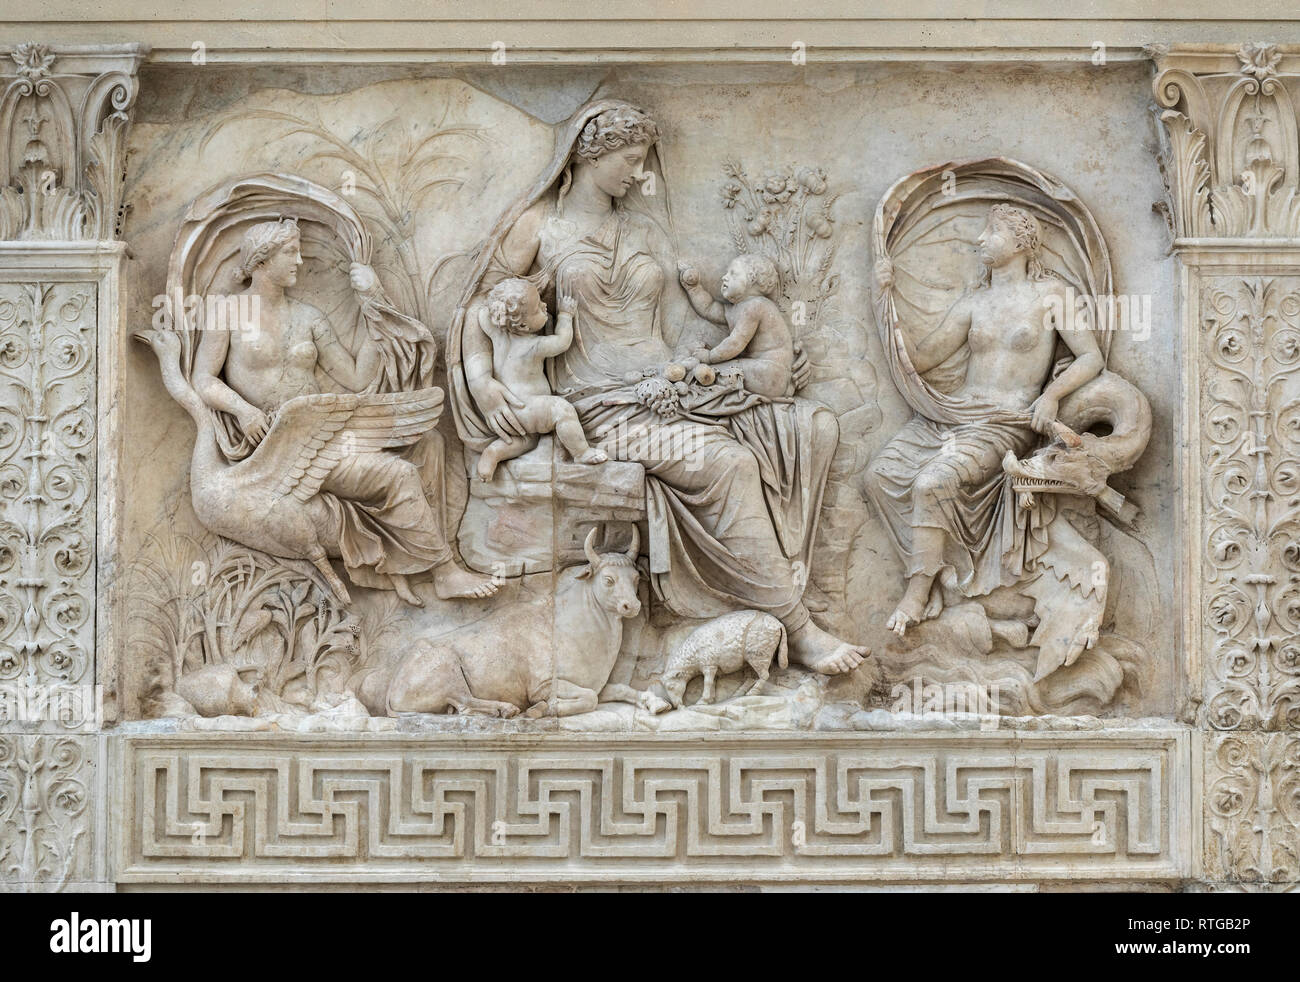 Ara Pacis Relief High Resolution Stock Photography and Images - Alamy